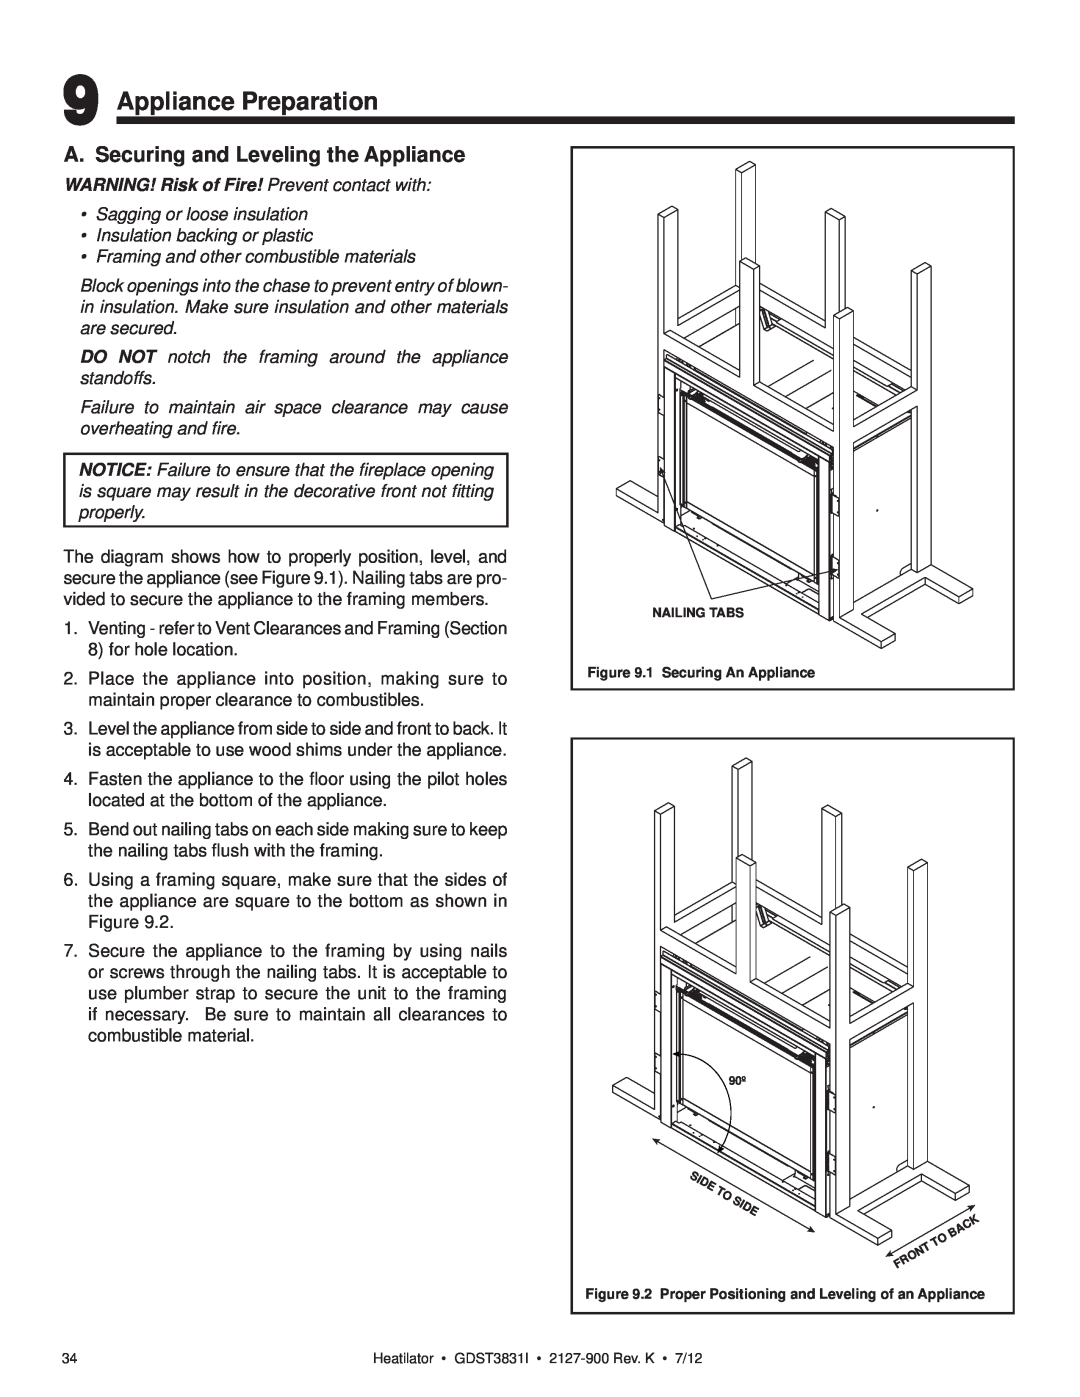 Heatiator GDST3831I owner manual Appliance Preparation, A. Securing and Leveling the Appliance 